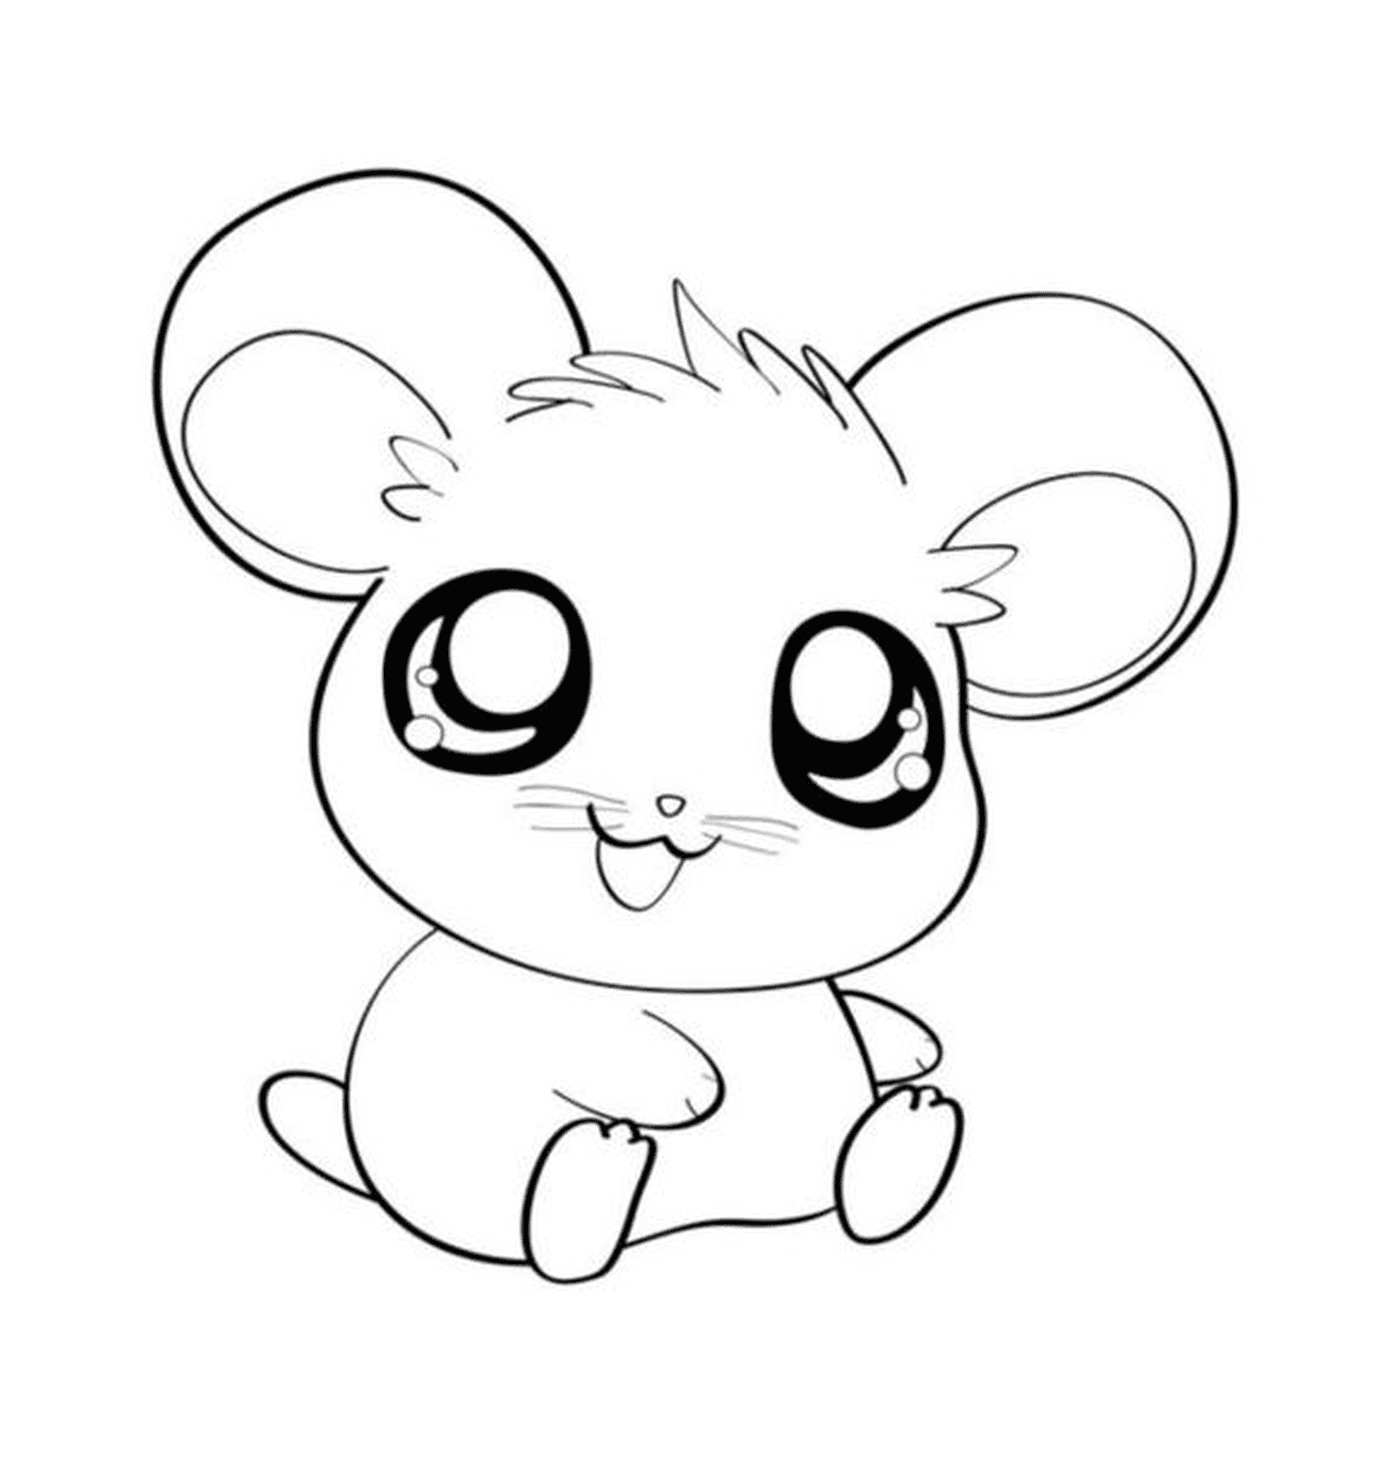  A cute mouse sitting on the floor 